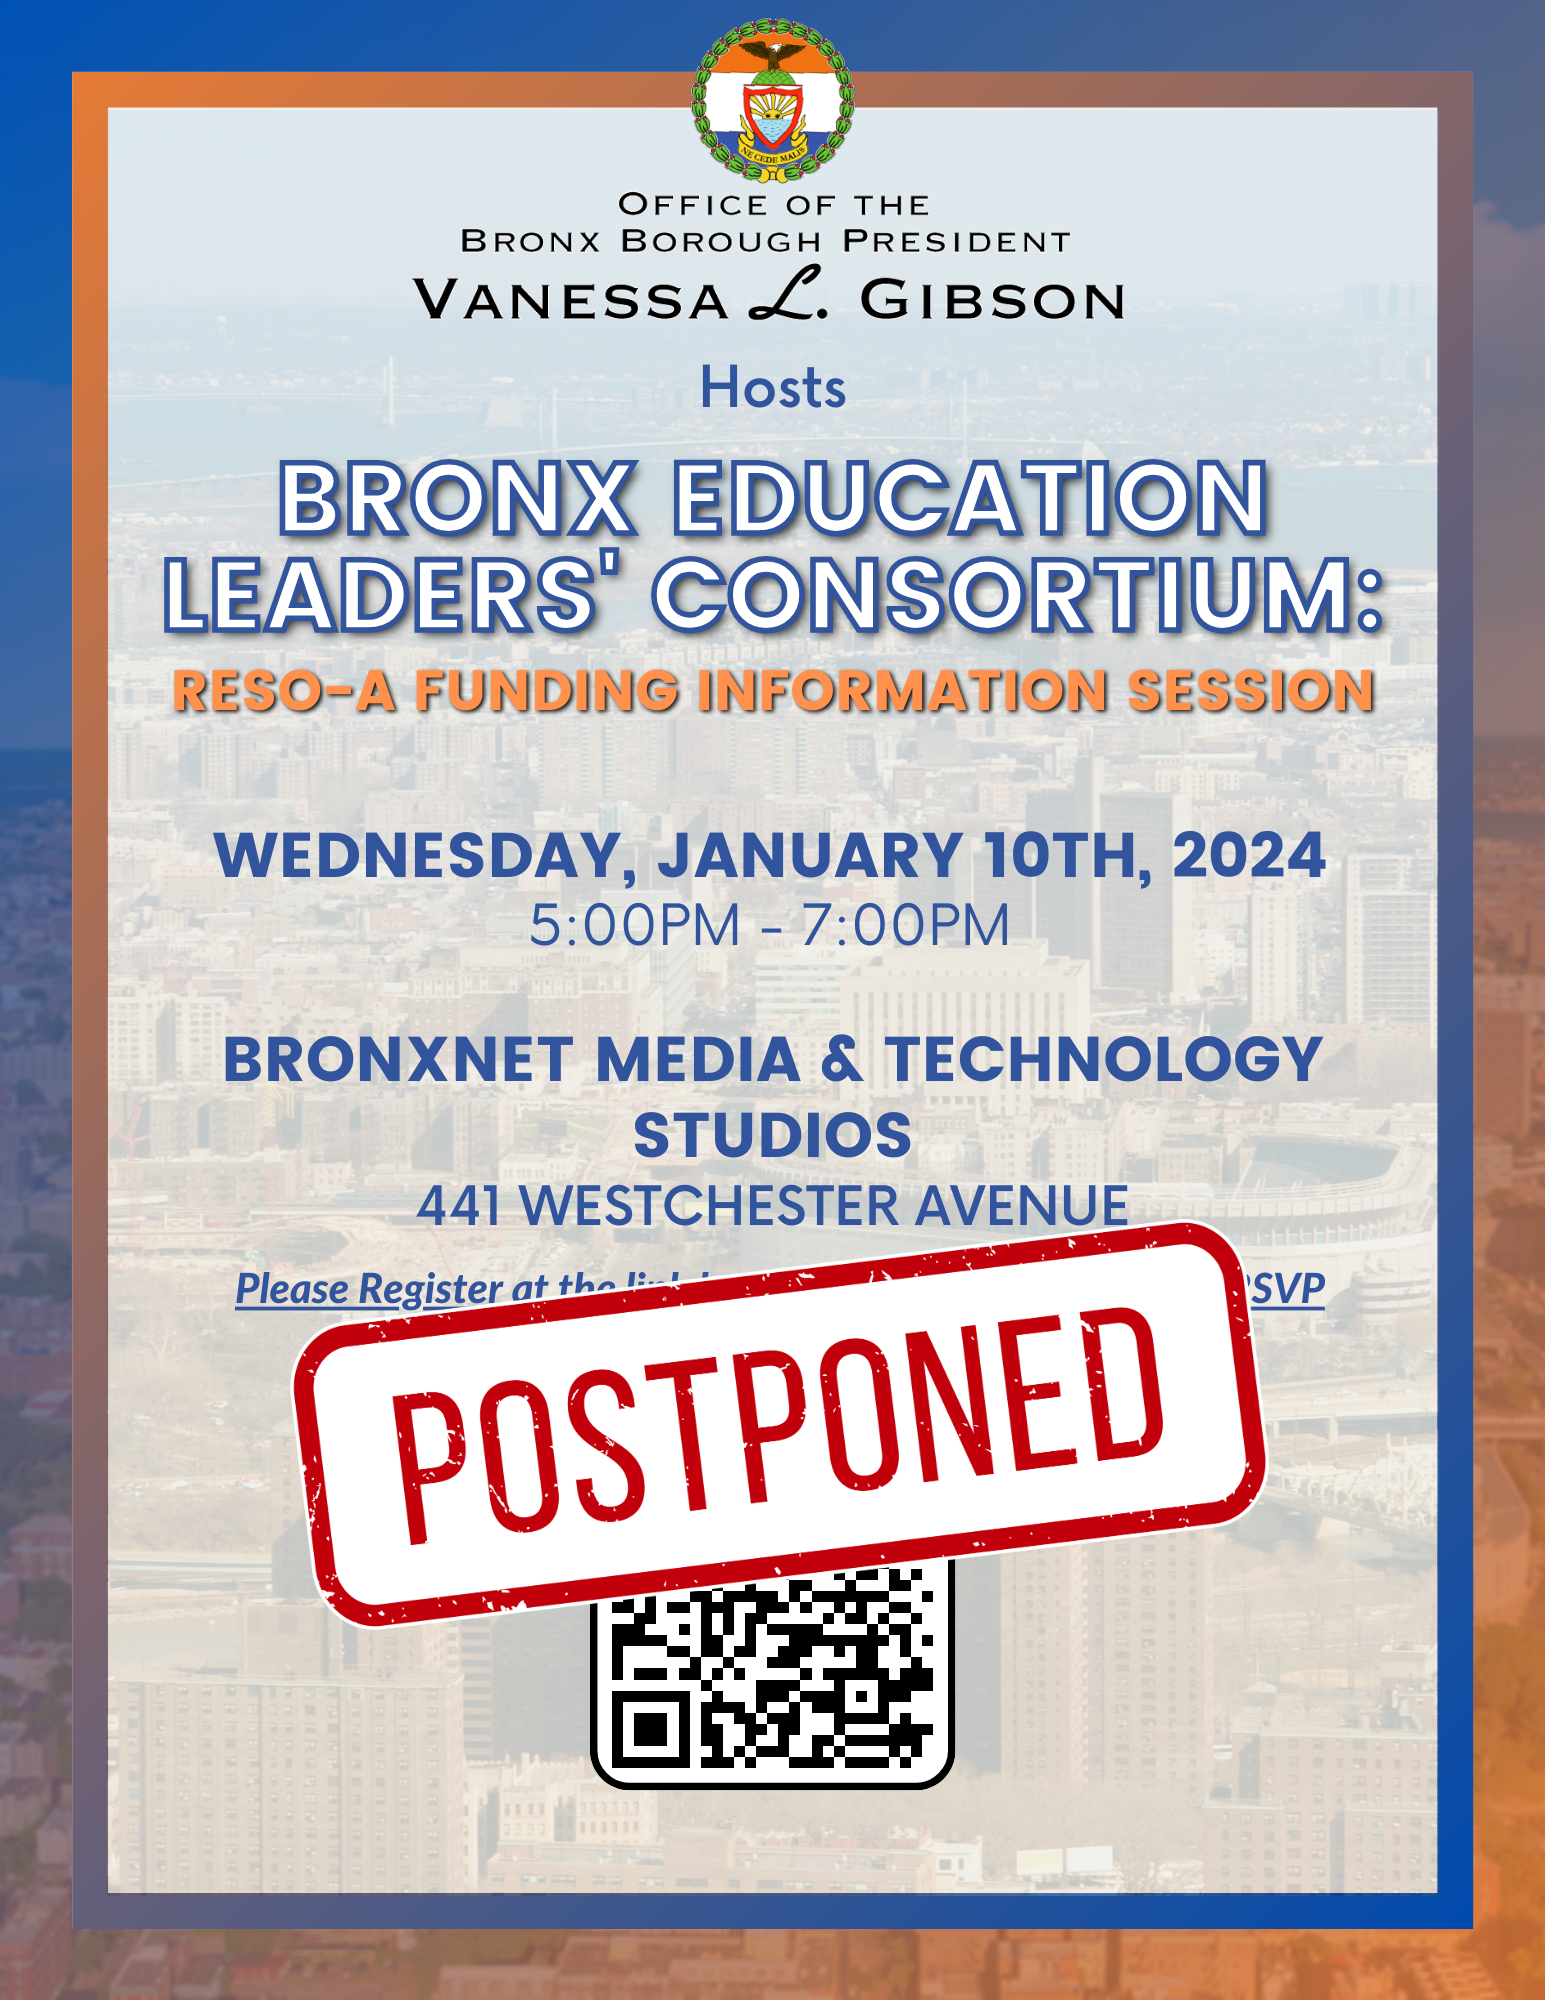 A flyer for the postponed Reso-A event that was originally scheduled for January 10, 2024.